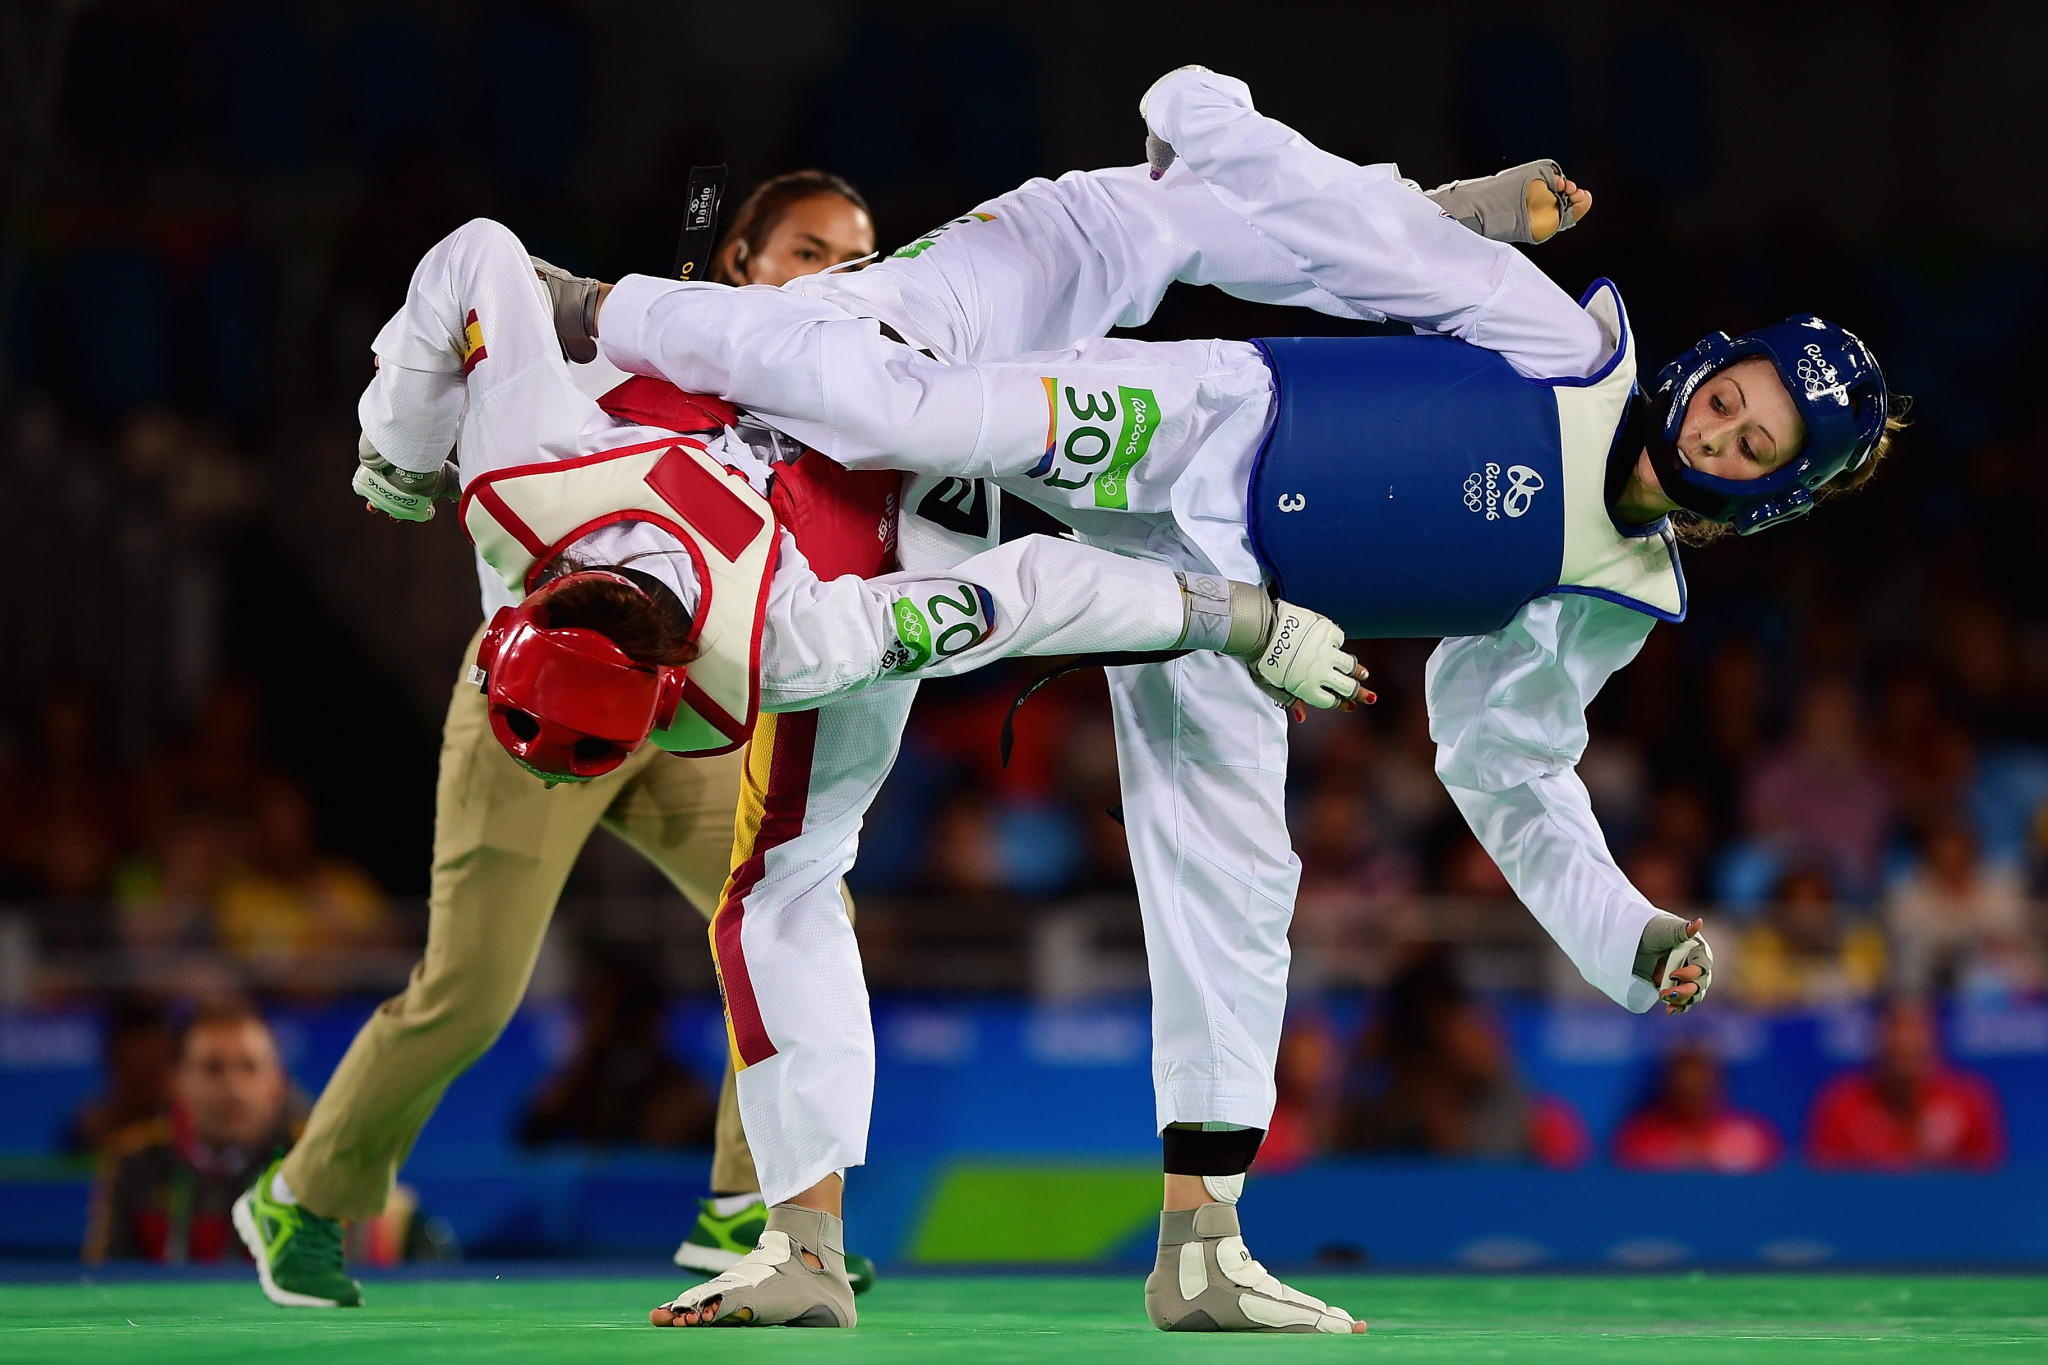 Taekwondo will not feature on the Birmingham 2022 sport programme ©Getty Images